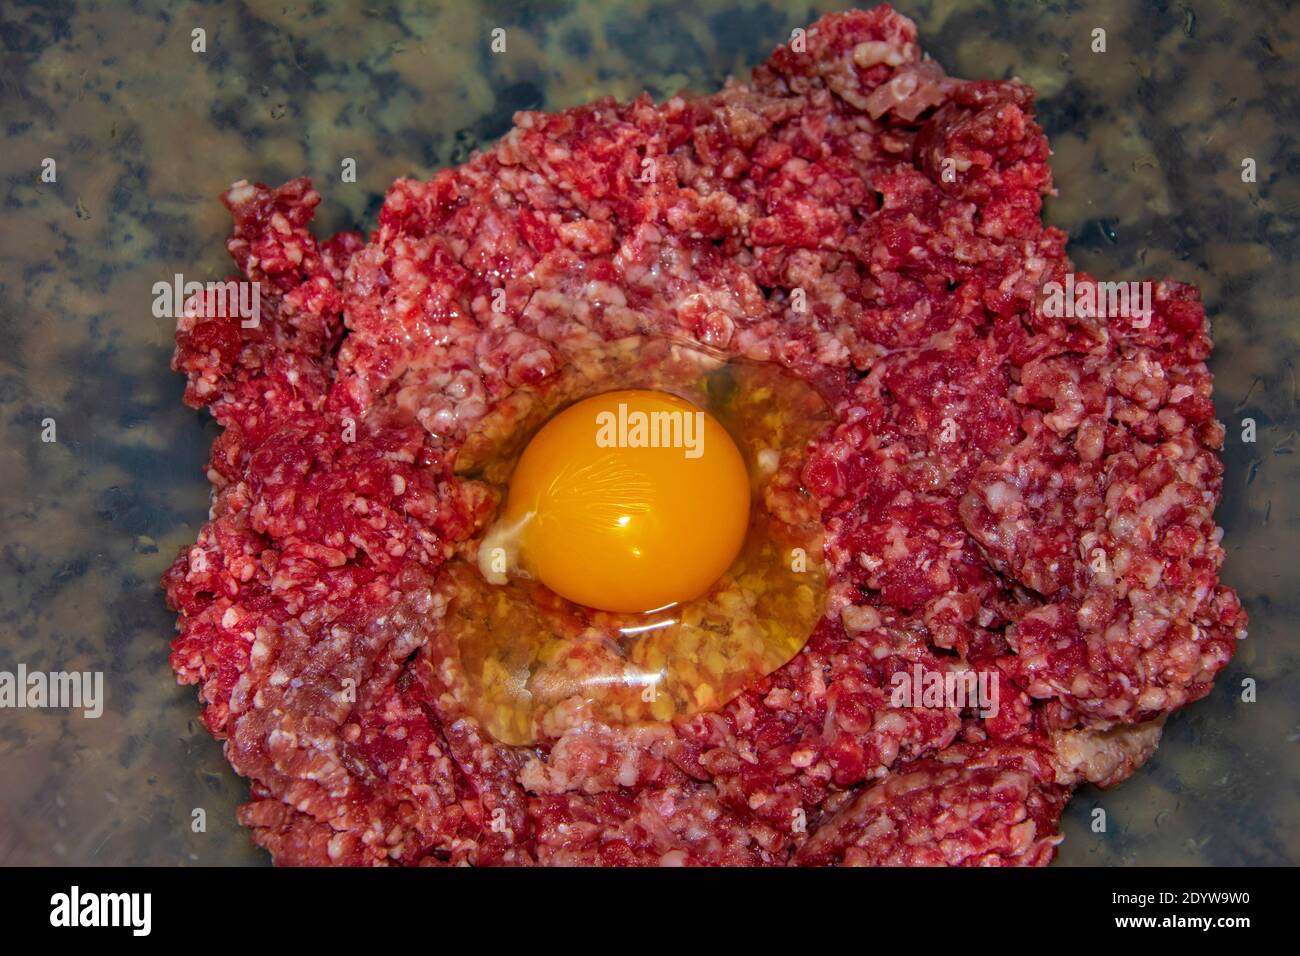 Egg on raw ground beef in close-up Stock Photo